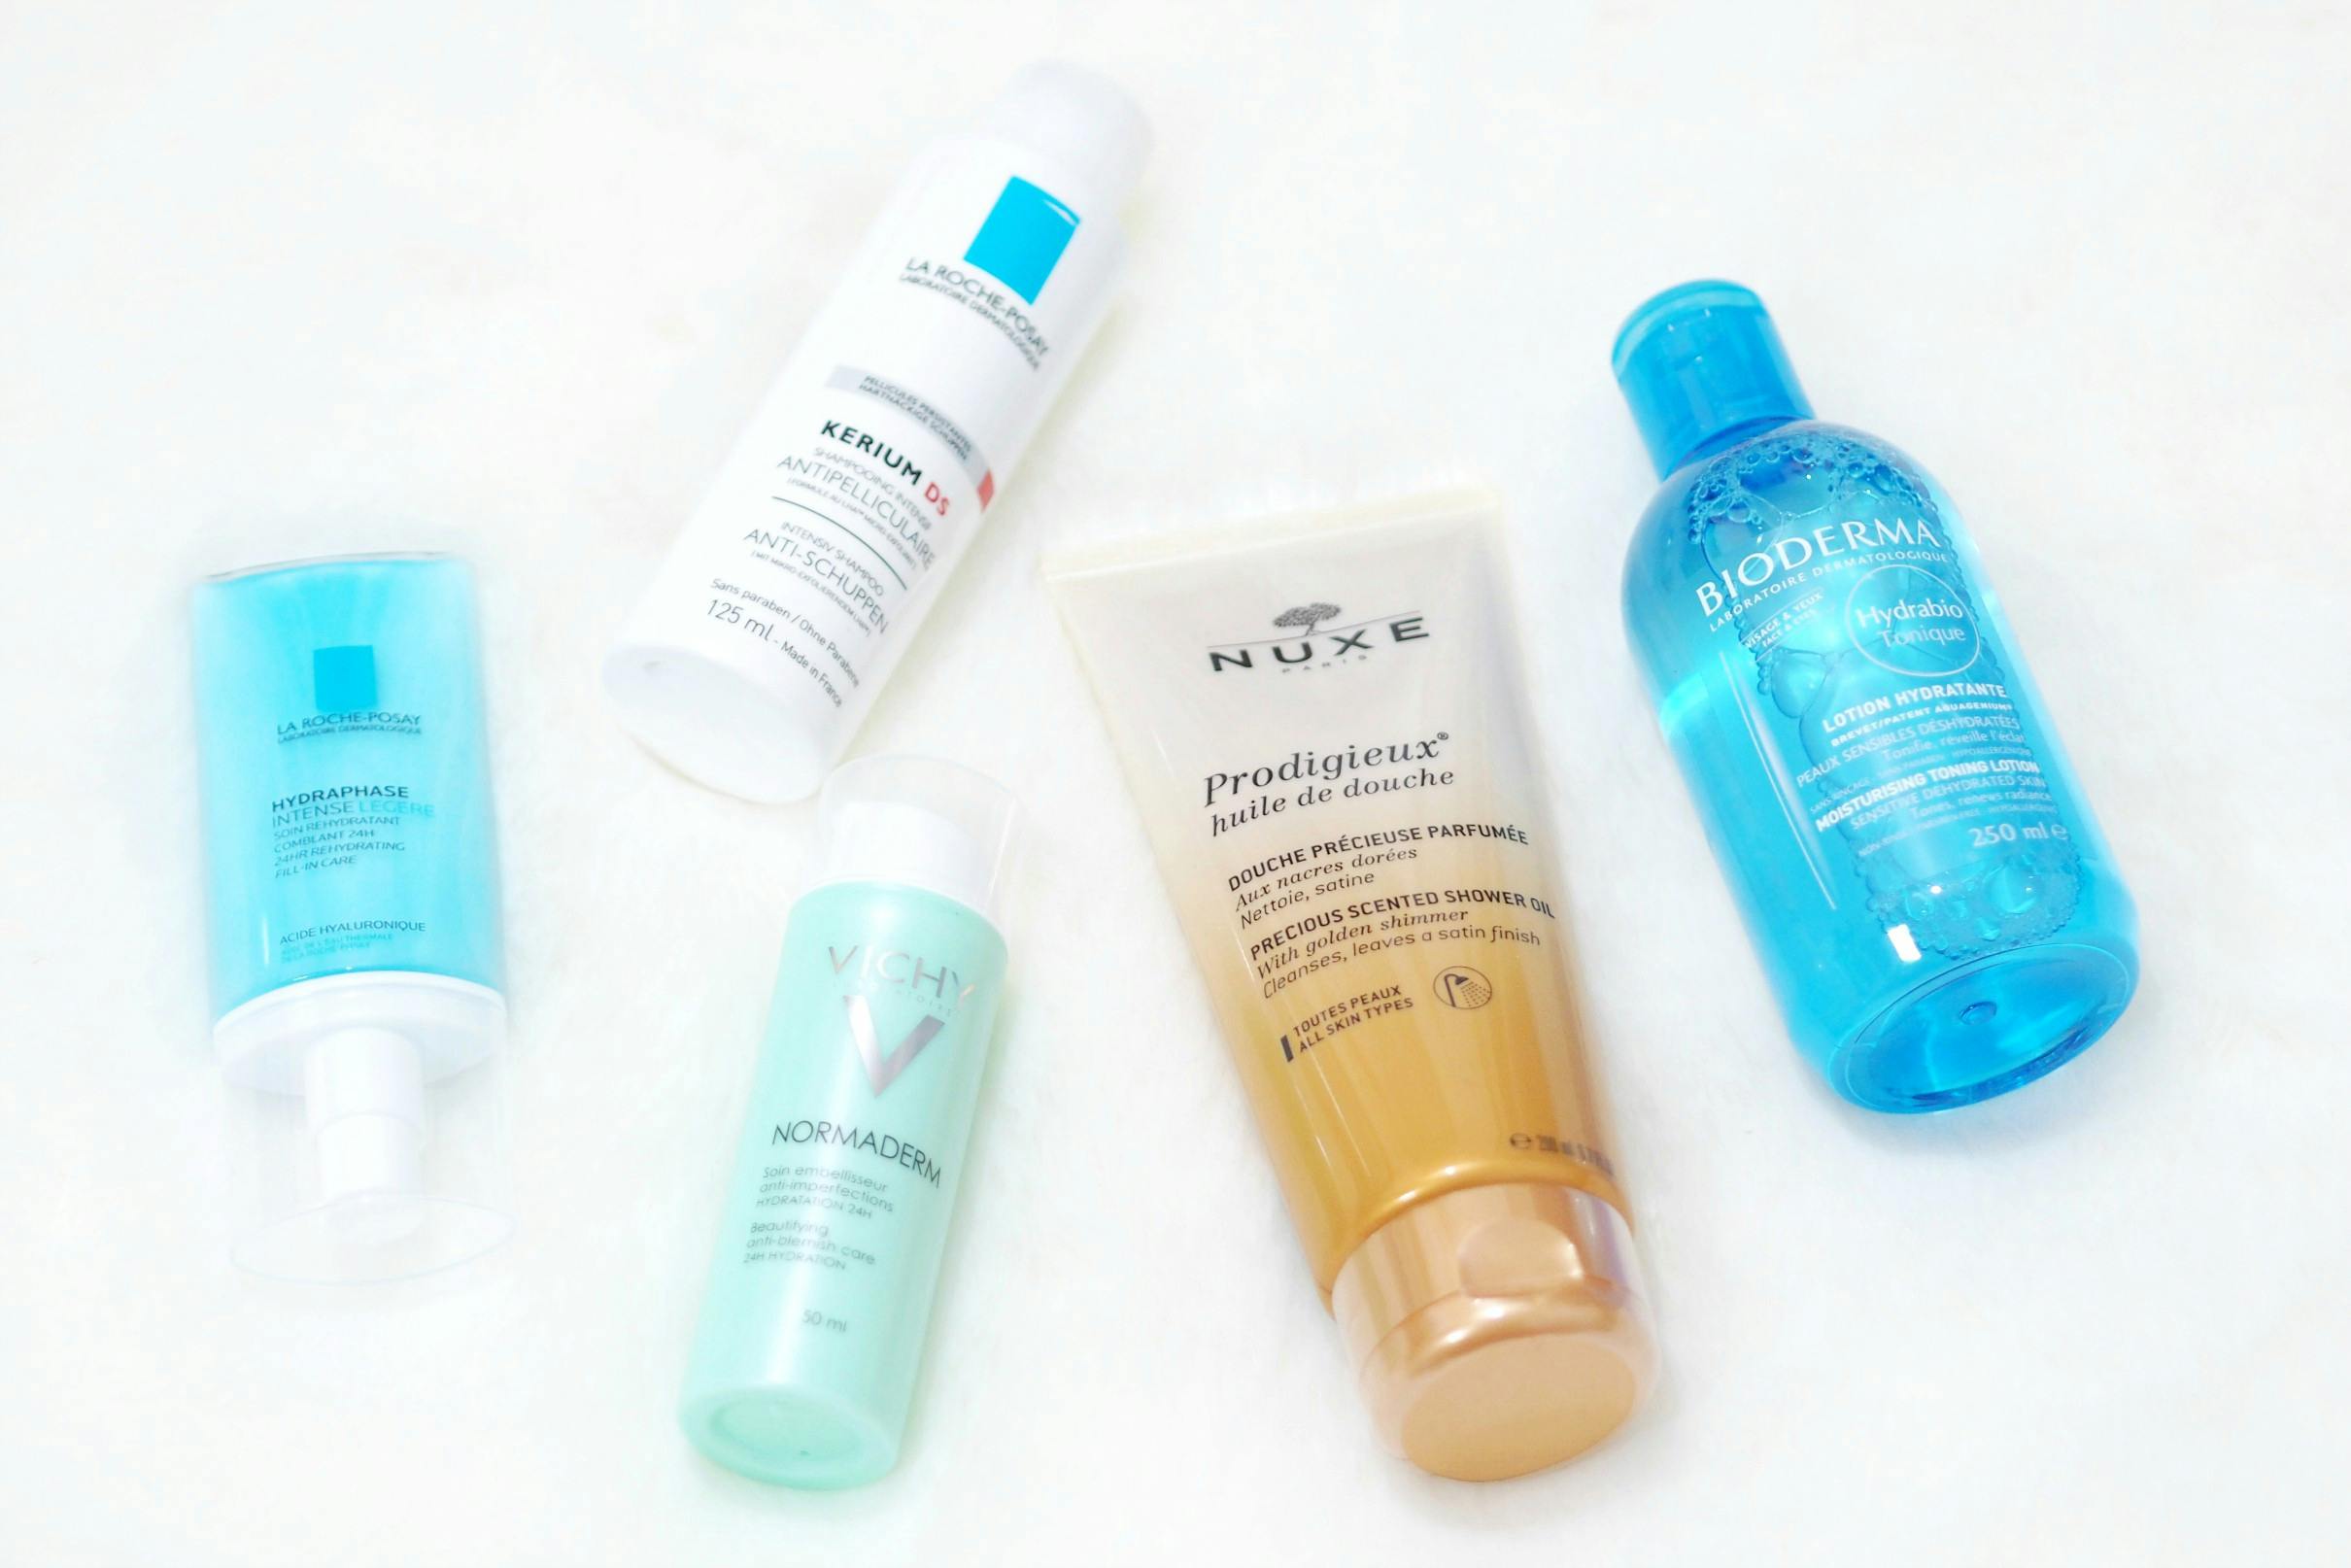 La Roche-Posay Hydraphase, Kerium DS, Bioderma Hydrabio, Normaderm, NUXE oil 